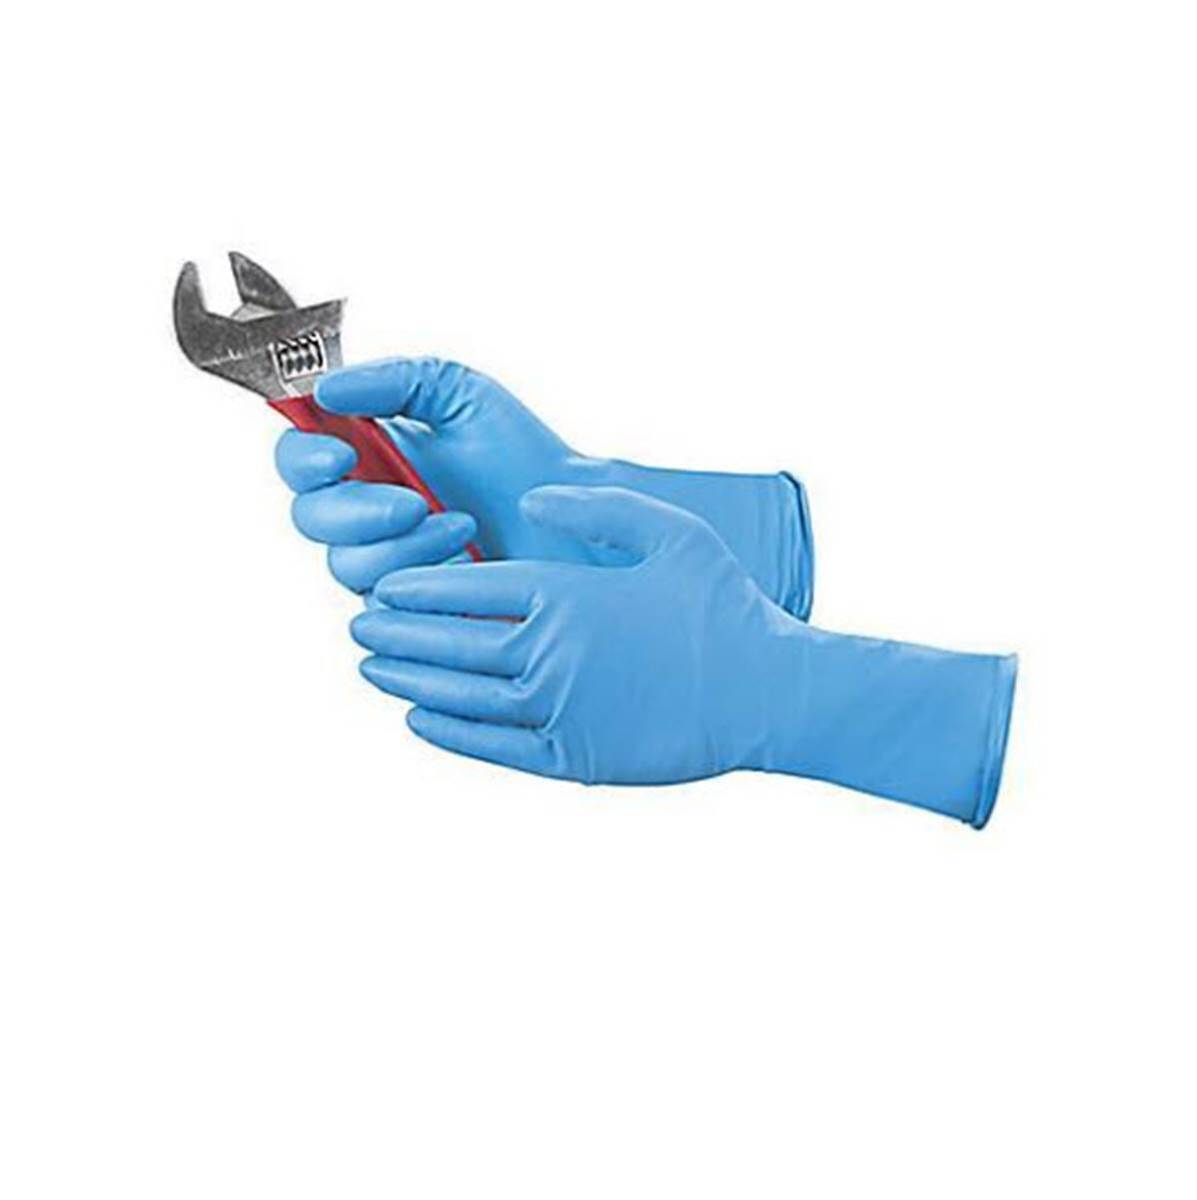 SafePath Large Blue Super Heavy Duty 11 mil Nitrile Powder-Free Disposable Industrial Grade Gloves (50 Gloves Per Box) (Limited